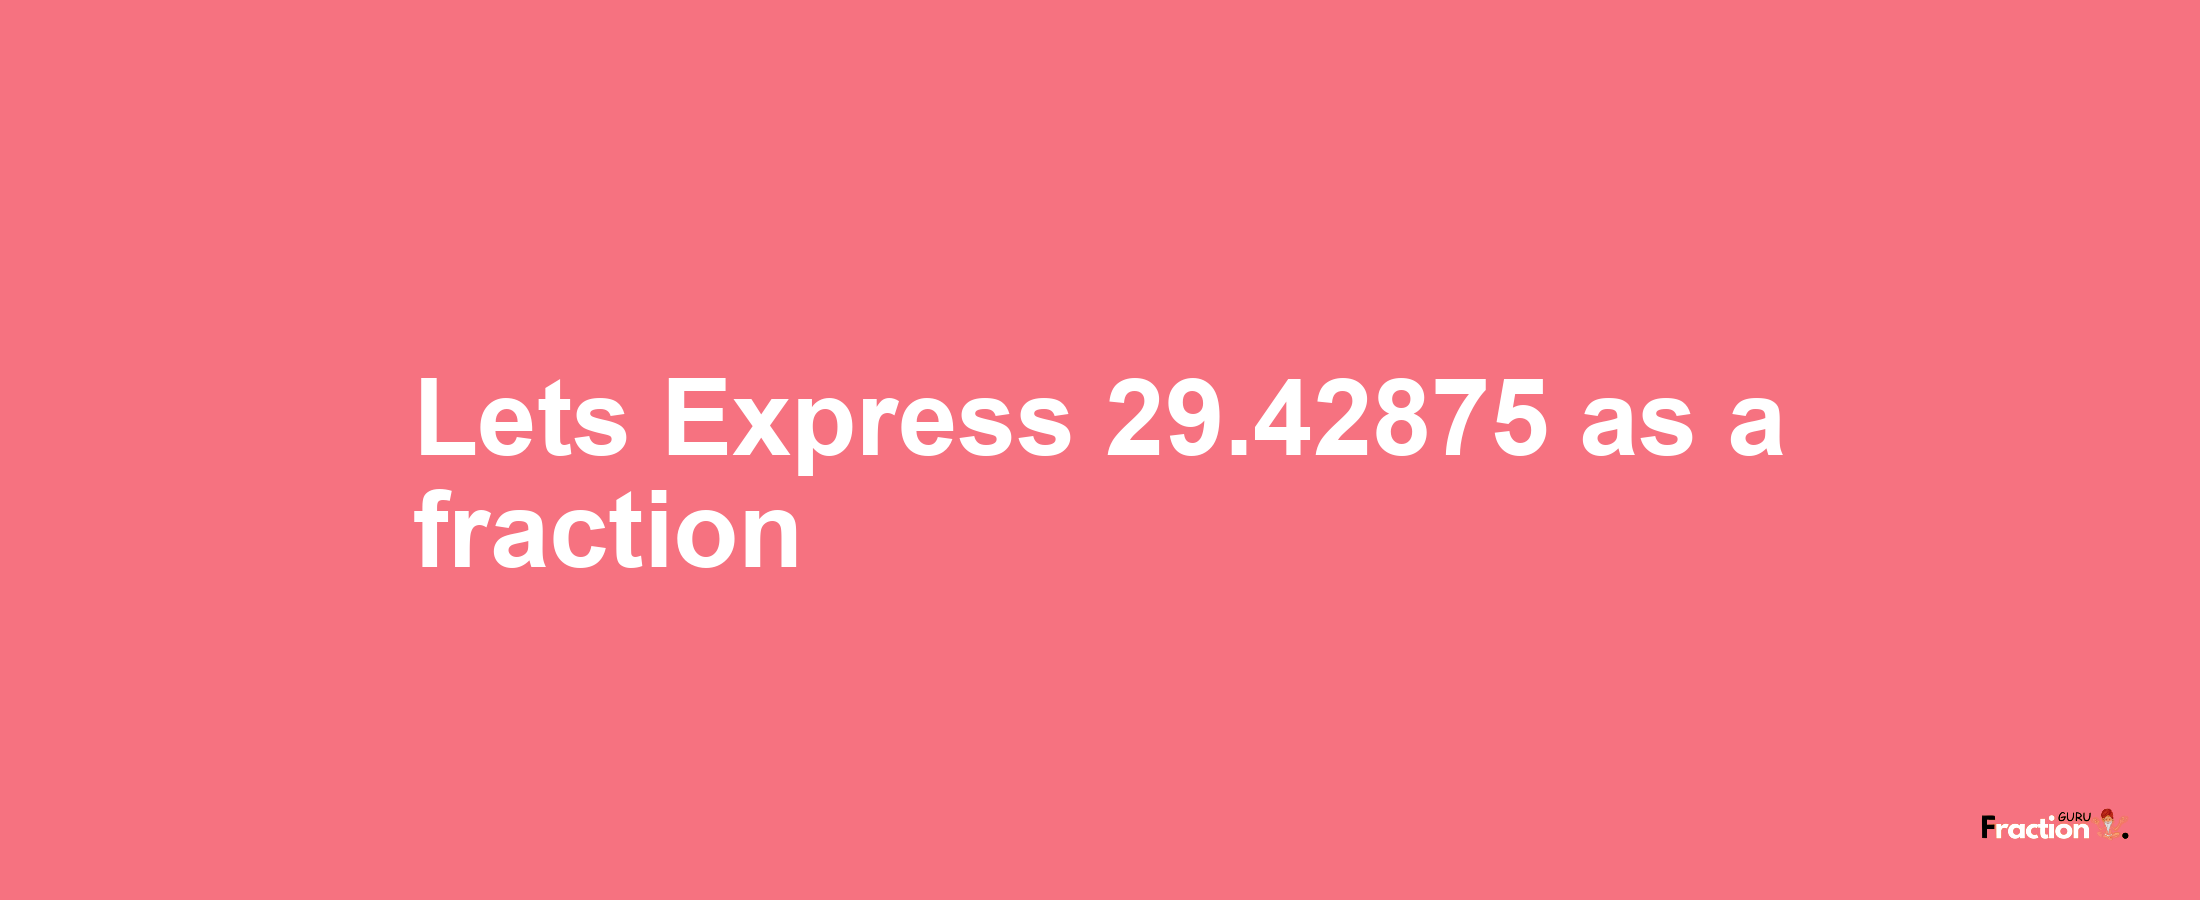 Lets Express 29.42875 as afraction